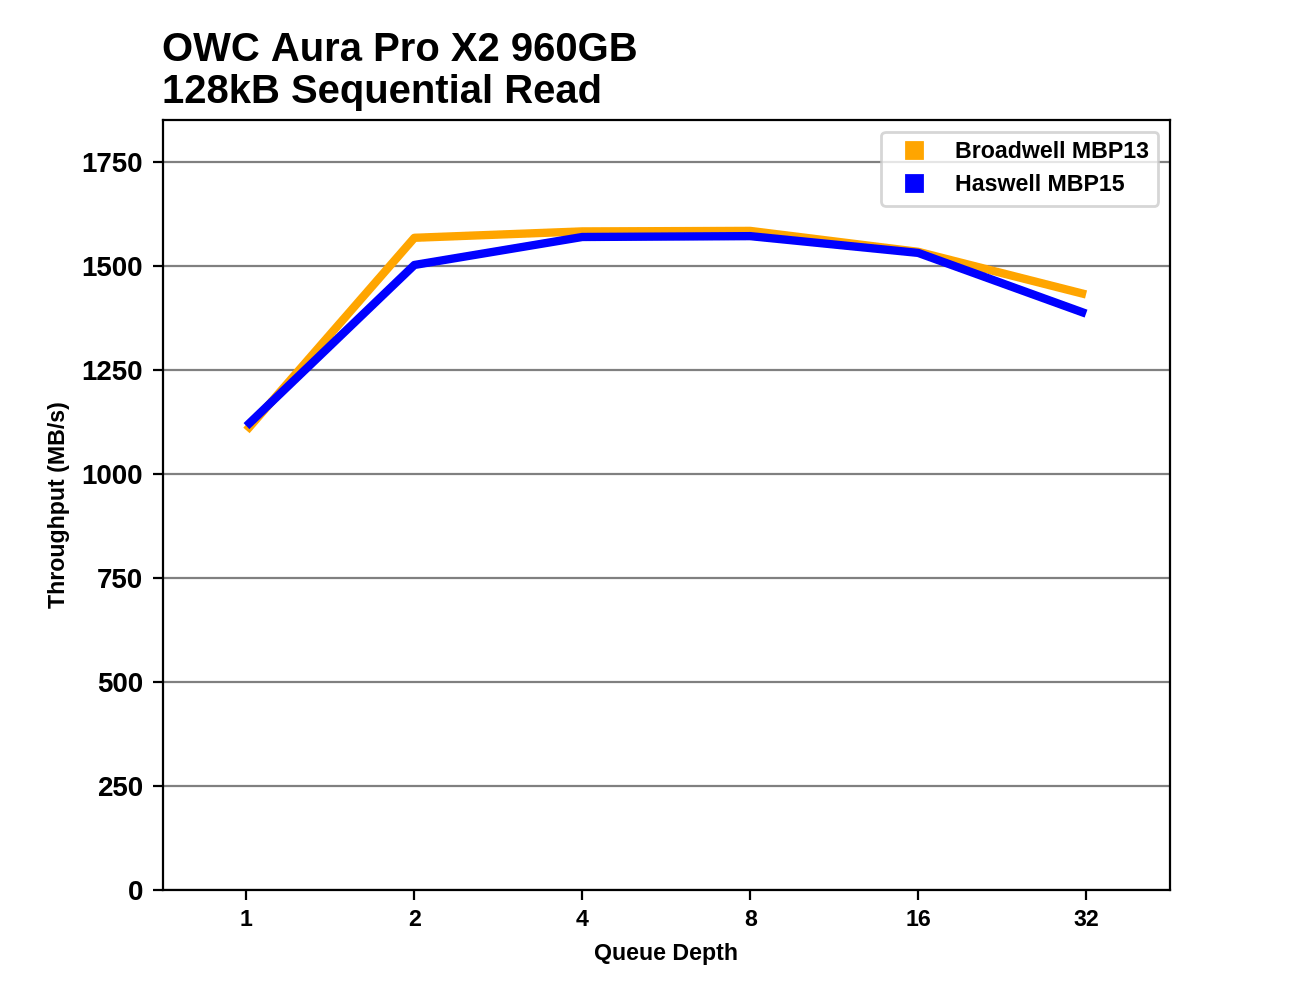 does owc aura pro x drive reset throttle after cooling